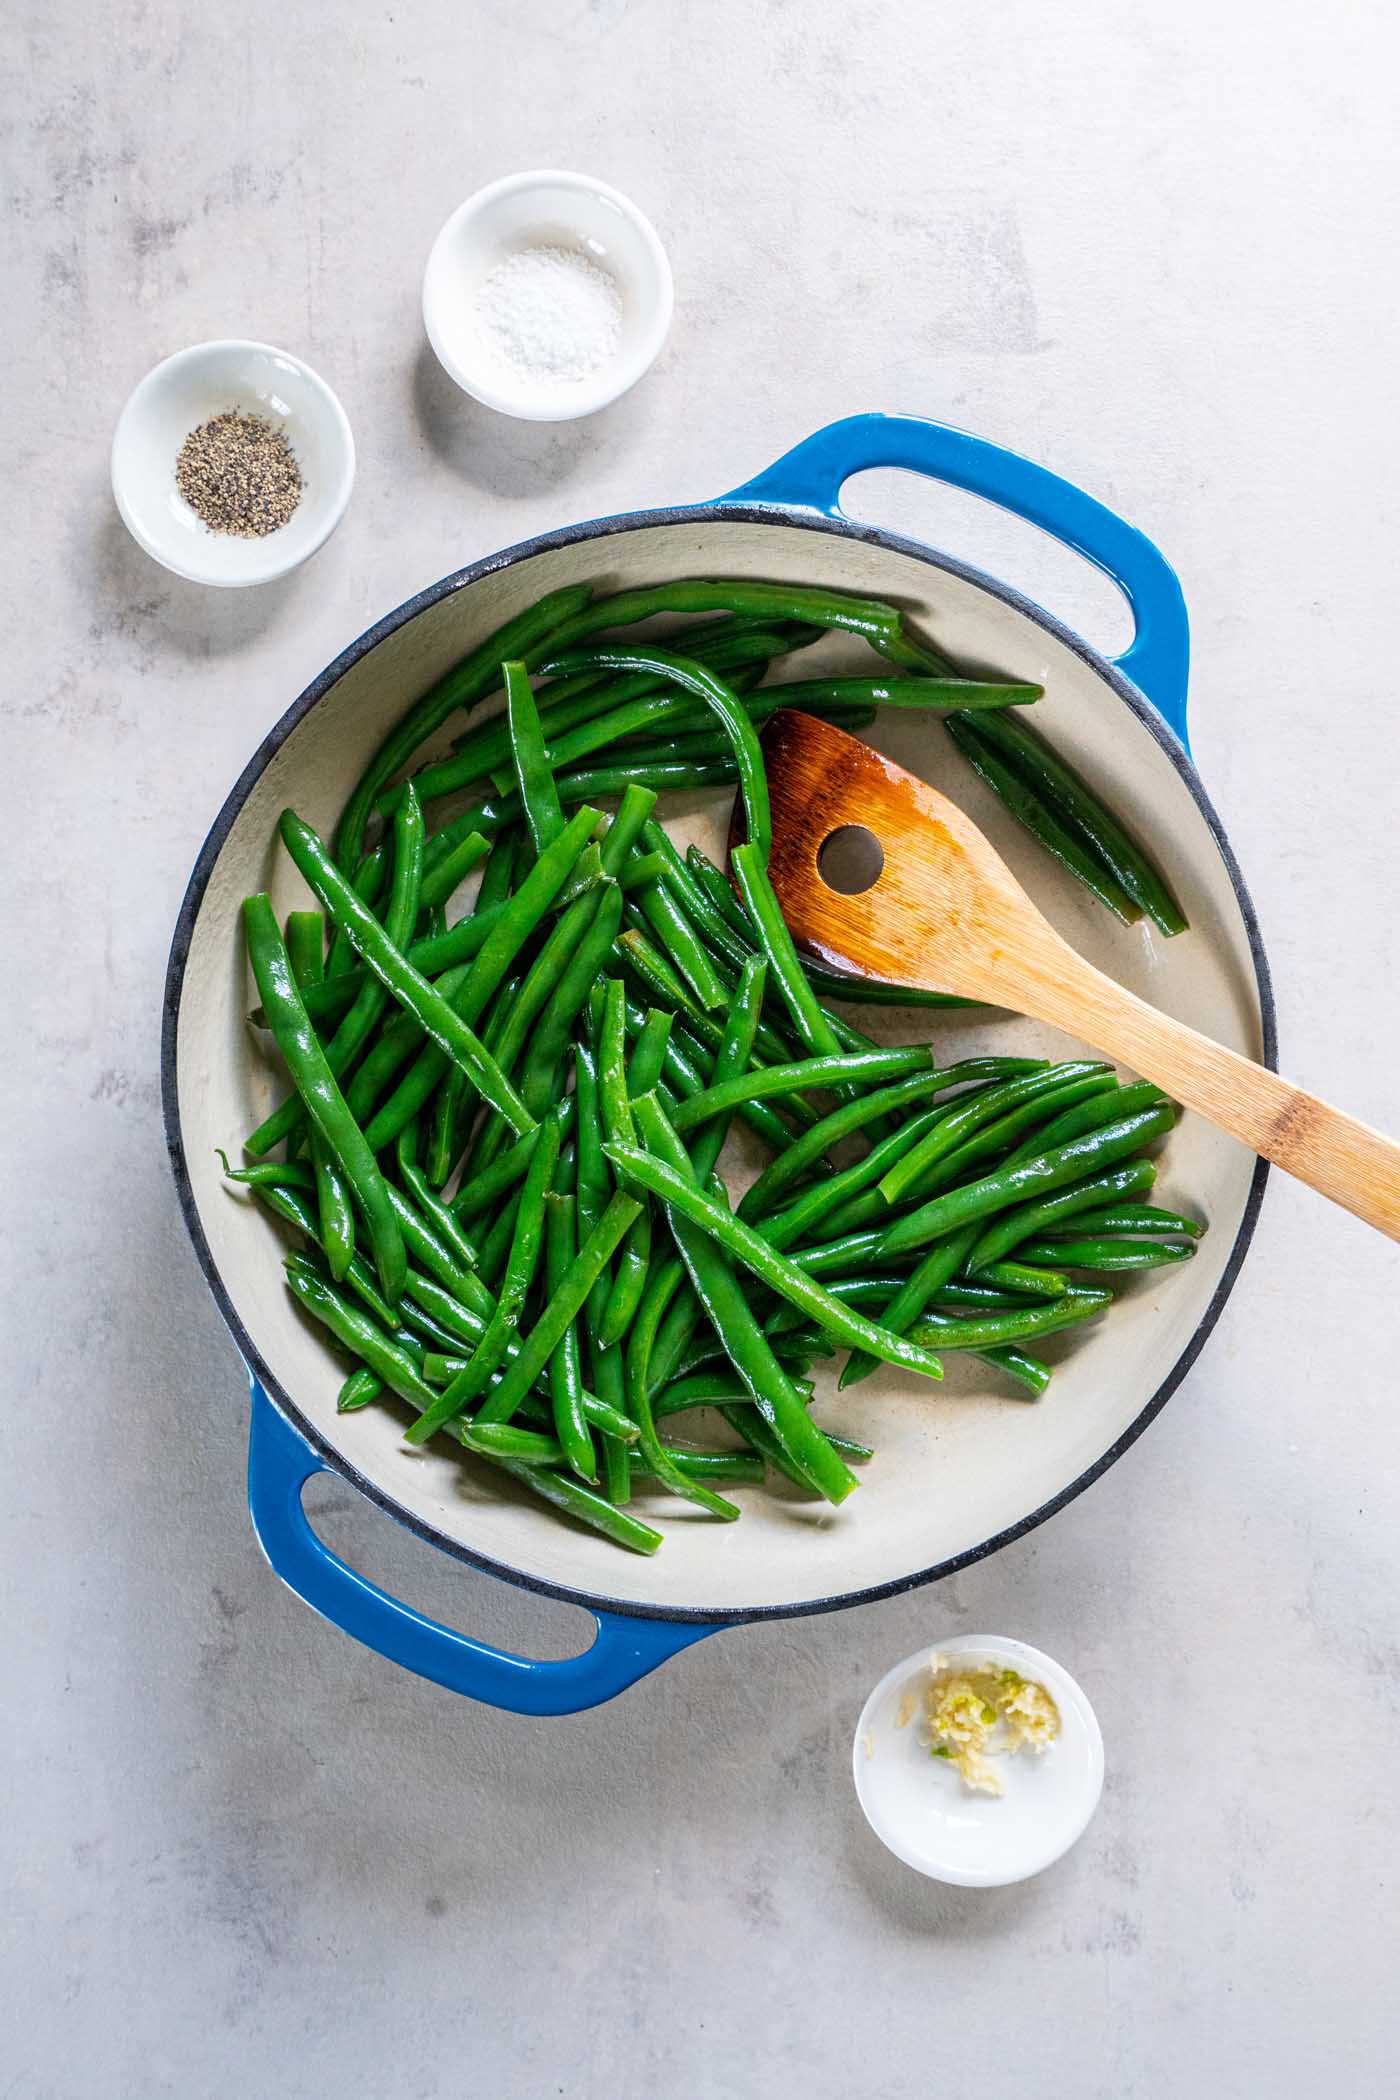 Sautéing green beans in skillet with a wooden spoon.